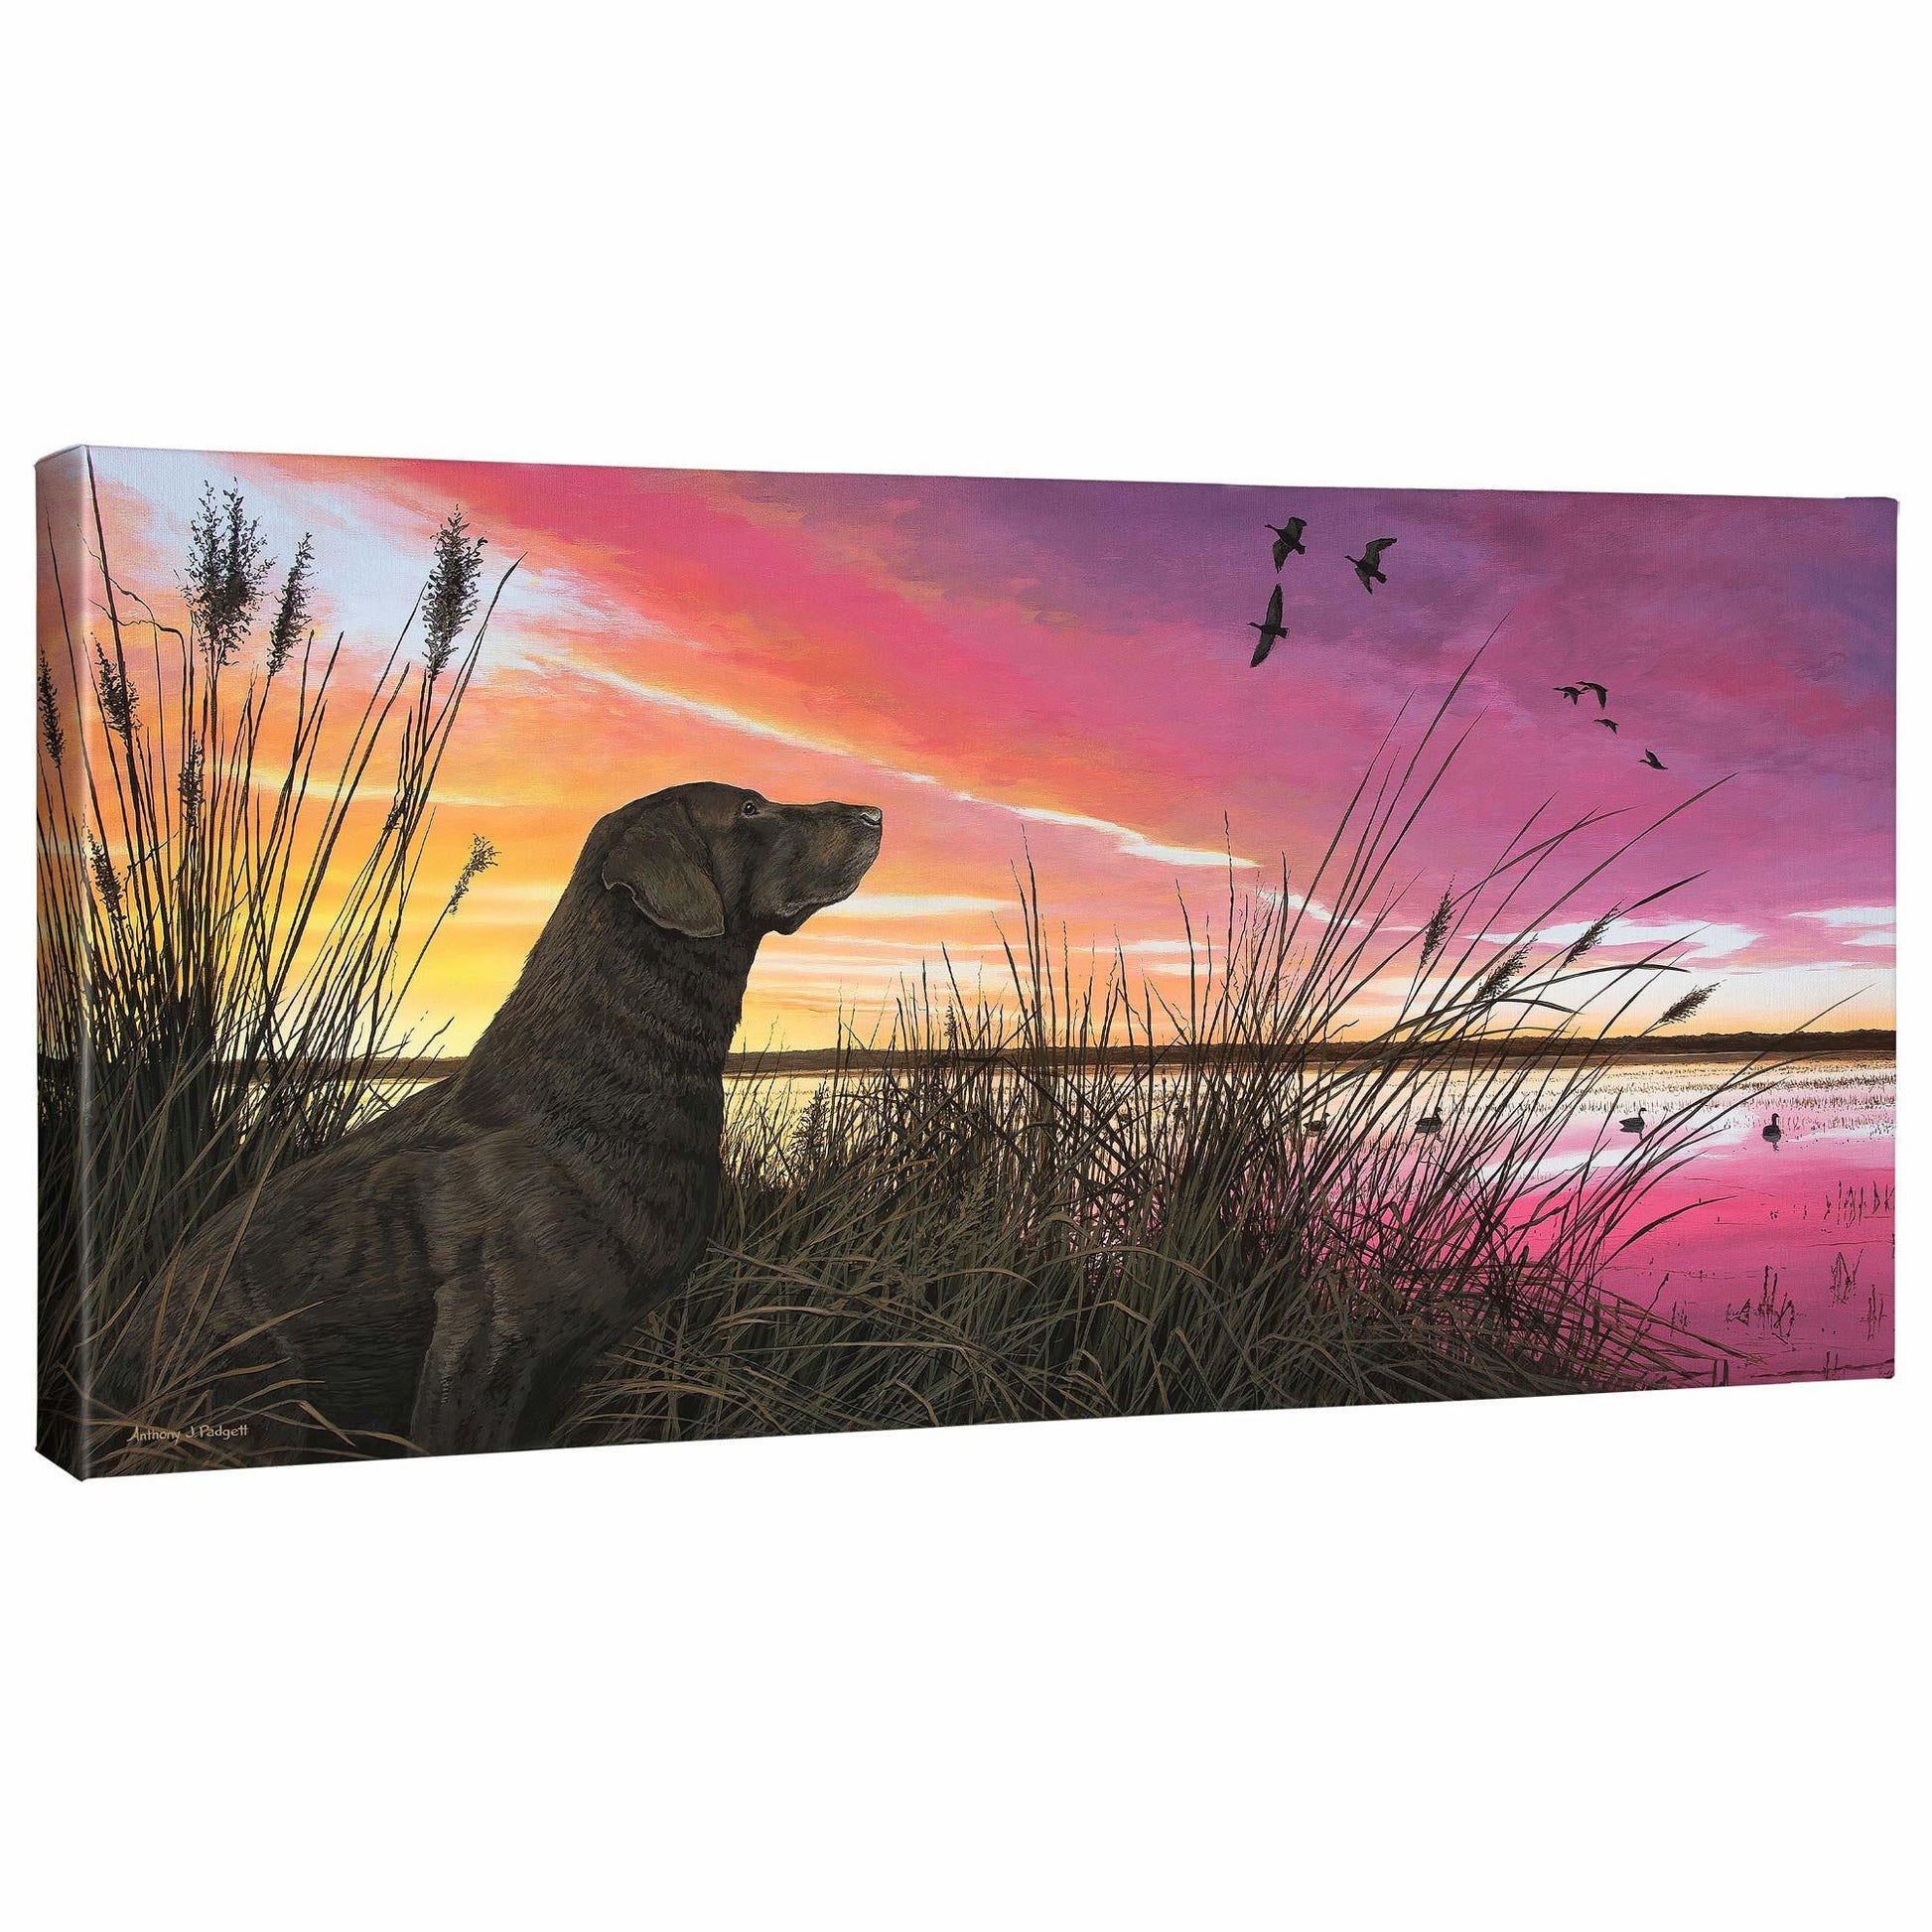 Breaking Cover—Chocolate Lab Gallery Wrapped Canvas - Wild Wings